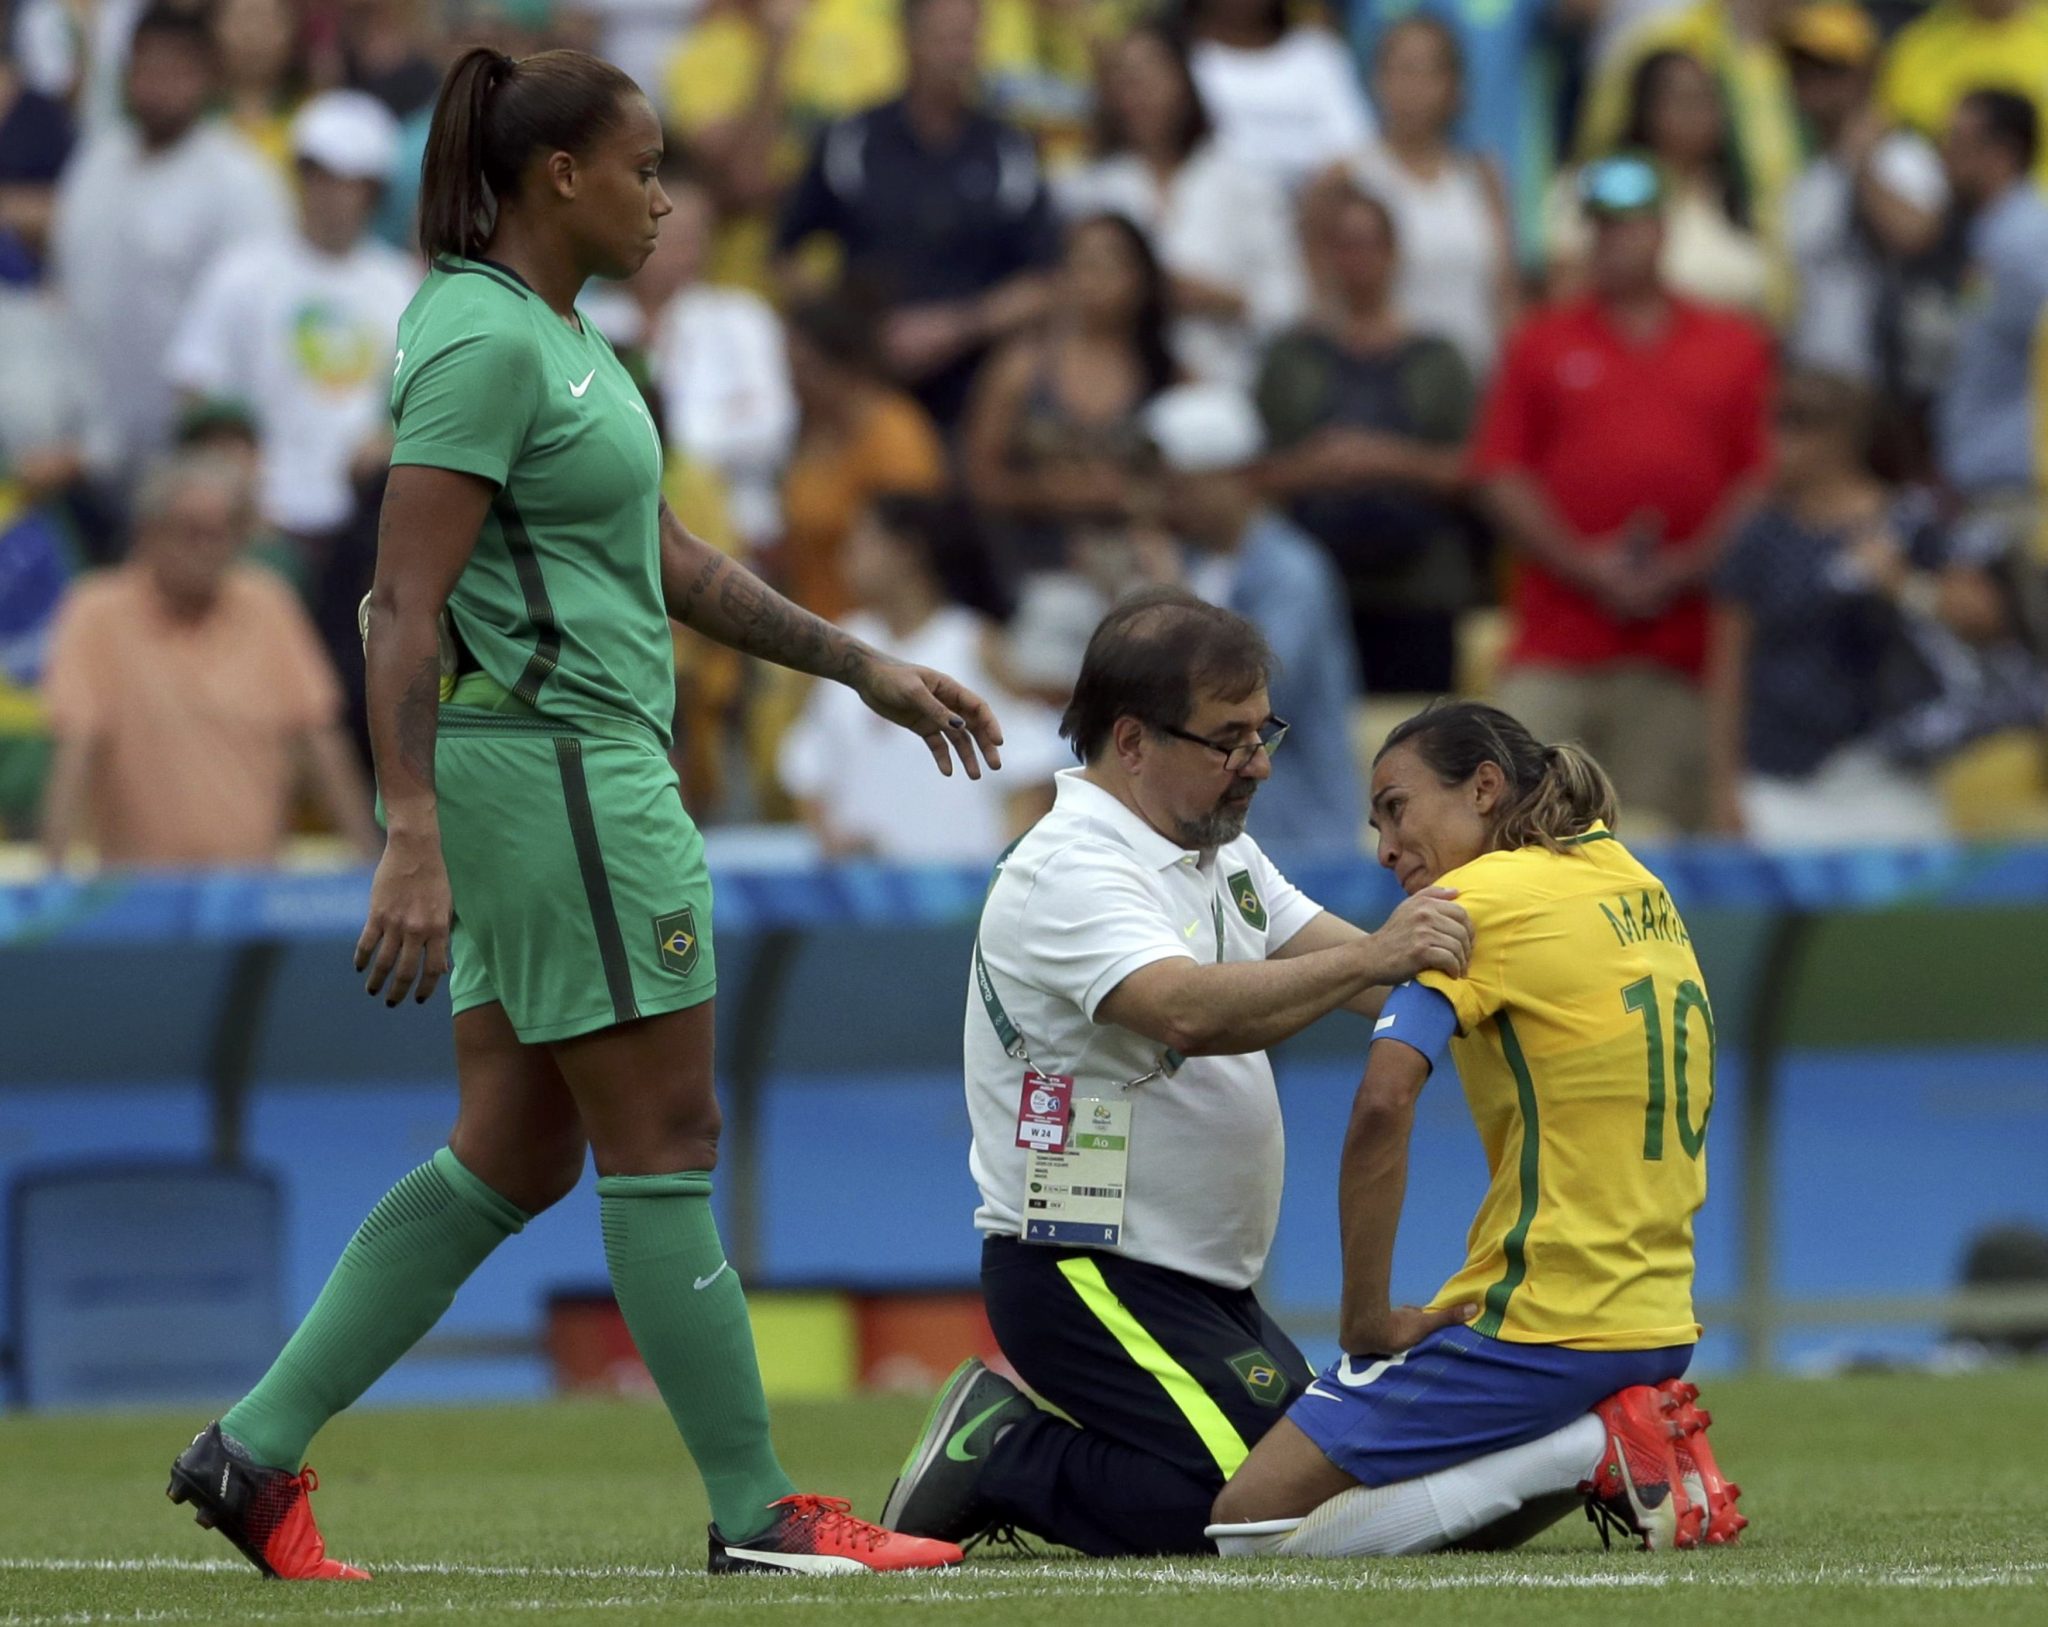 2016 Rio Olympics - Soccer - Semifinal - Women's Football Tournament Semifinal Brazil v Sweden - Maracana - Rio de Janeiro, Brazil - 16/08/2016. Marta (BRA) of Brazil is consoled by a team official as goalkeeper Barbara (BRA) of Brazil approaches after the game. REUTERS/Bruno Kelly FOR EDITORIAL USE ONLY. NOT FOR SALE FOR MARKETING OR ADVERTISING CAMPAIGNS.